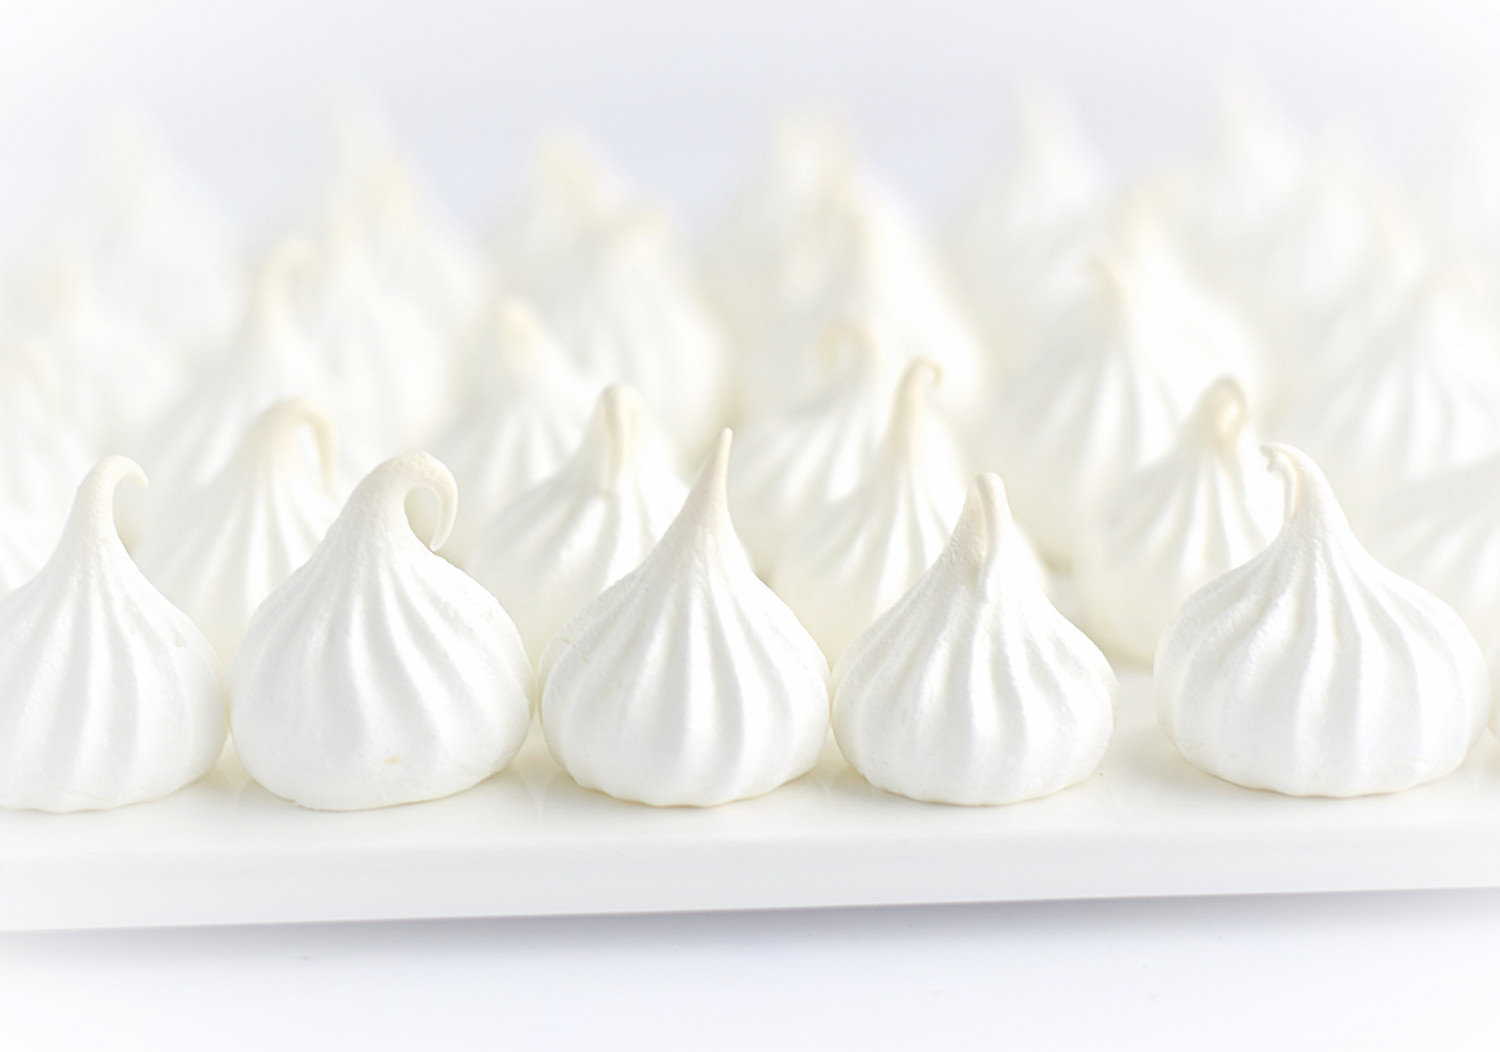 How to Make Perfect Meringues